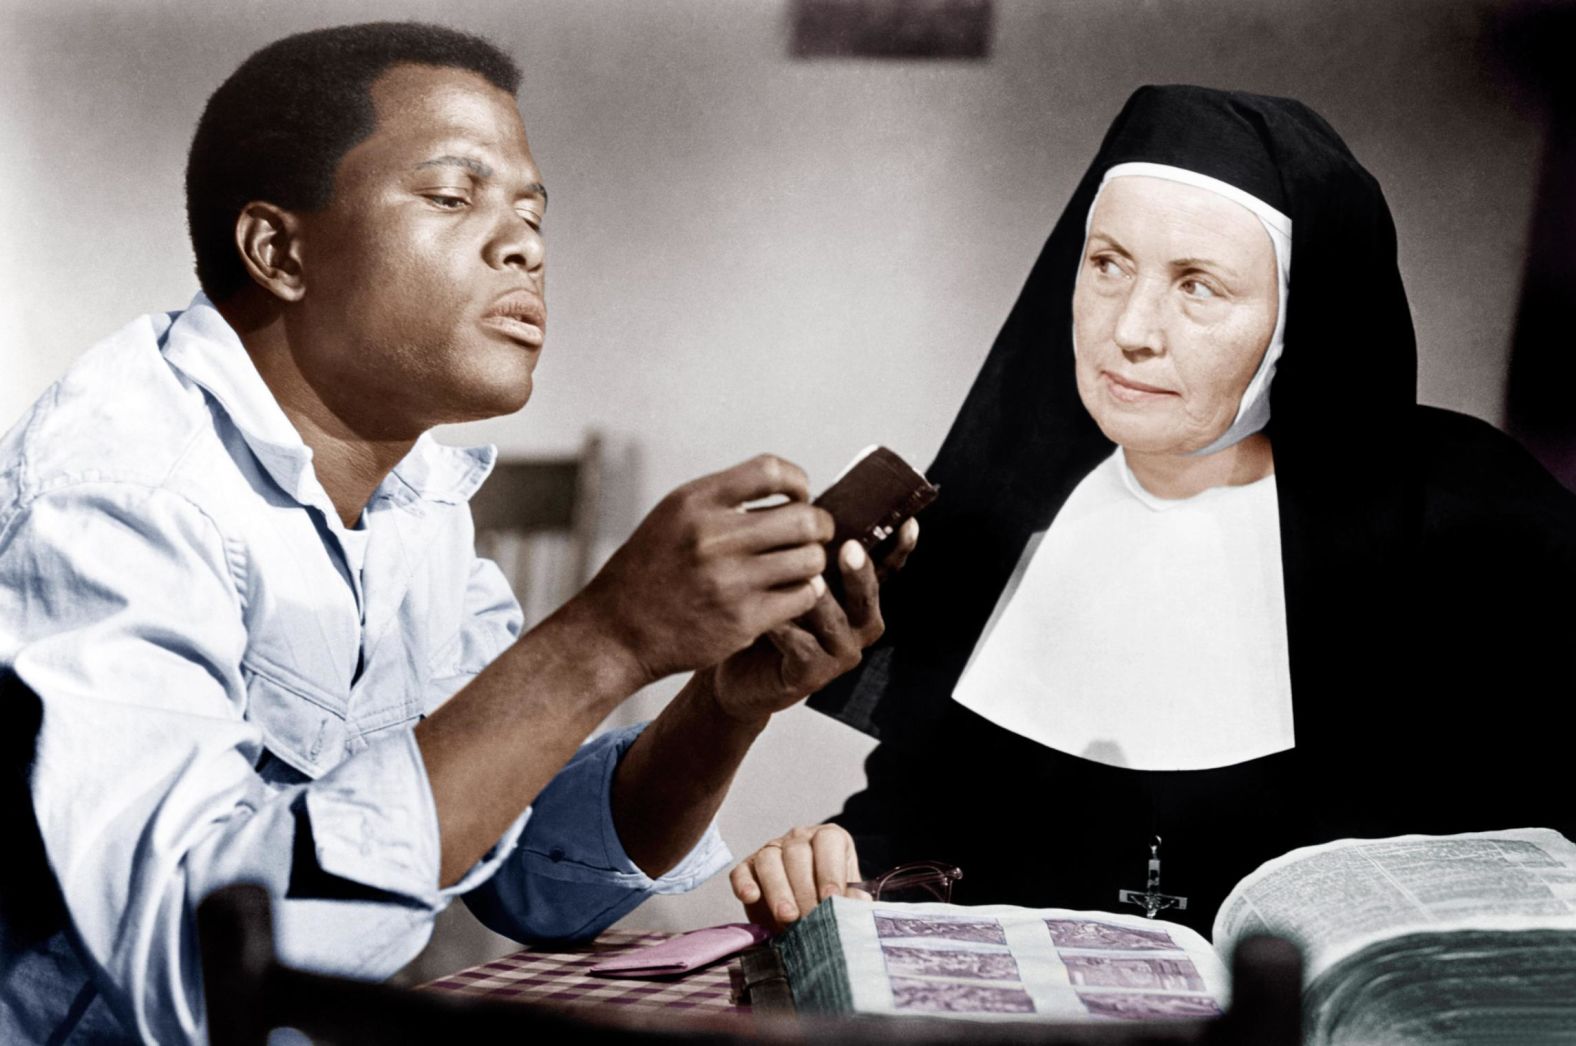 Poitier appears with Lilia Skala in the 1963 film "Lilies of the Field."